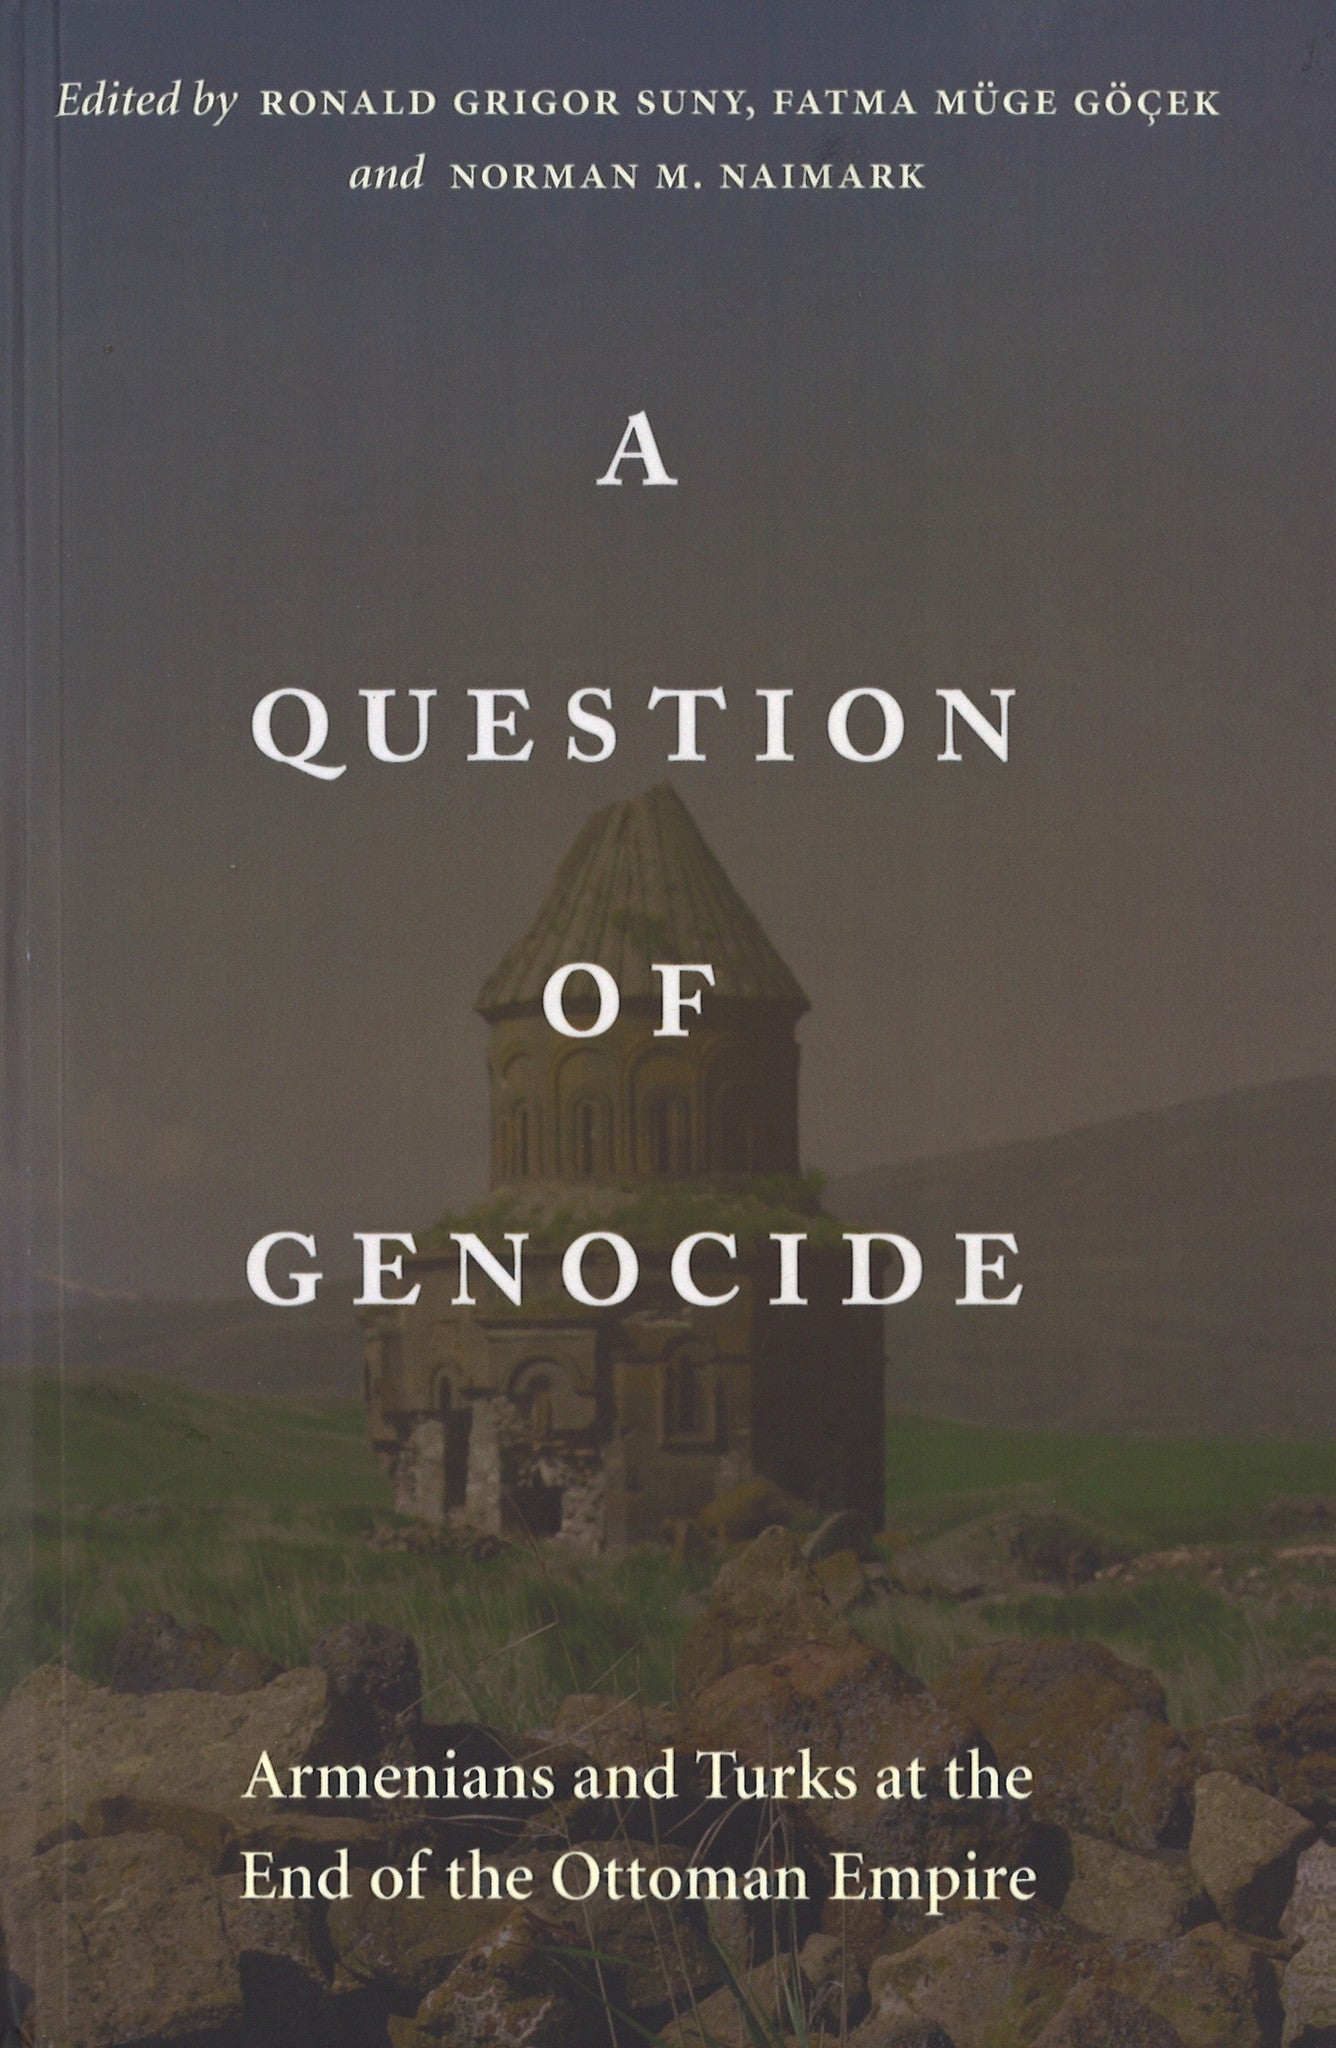 A QUESTION OF GENOCIDE: Armenians and Turks at the End of the Ottoman Empire